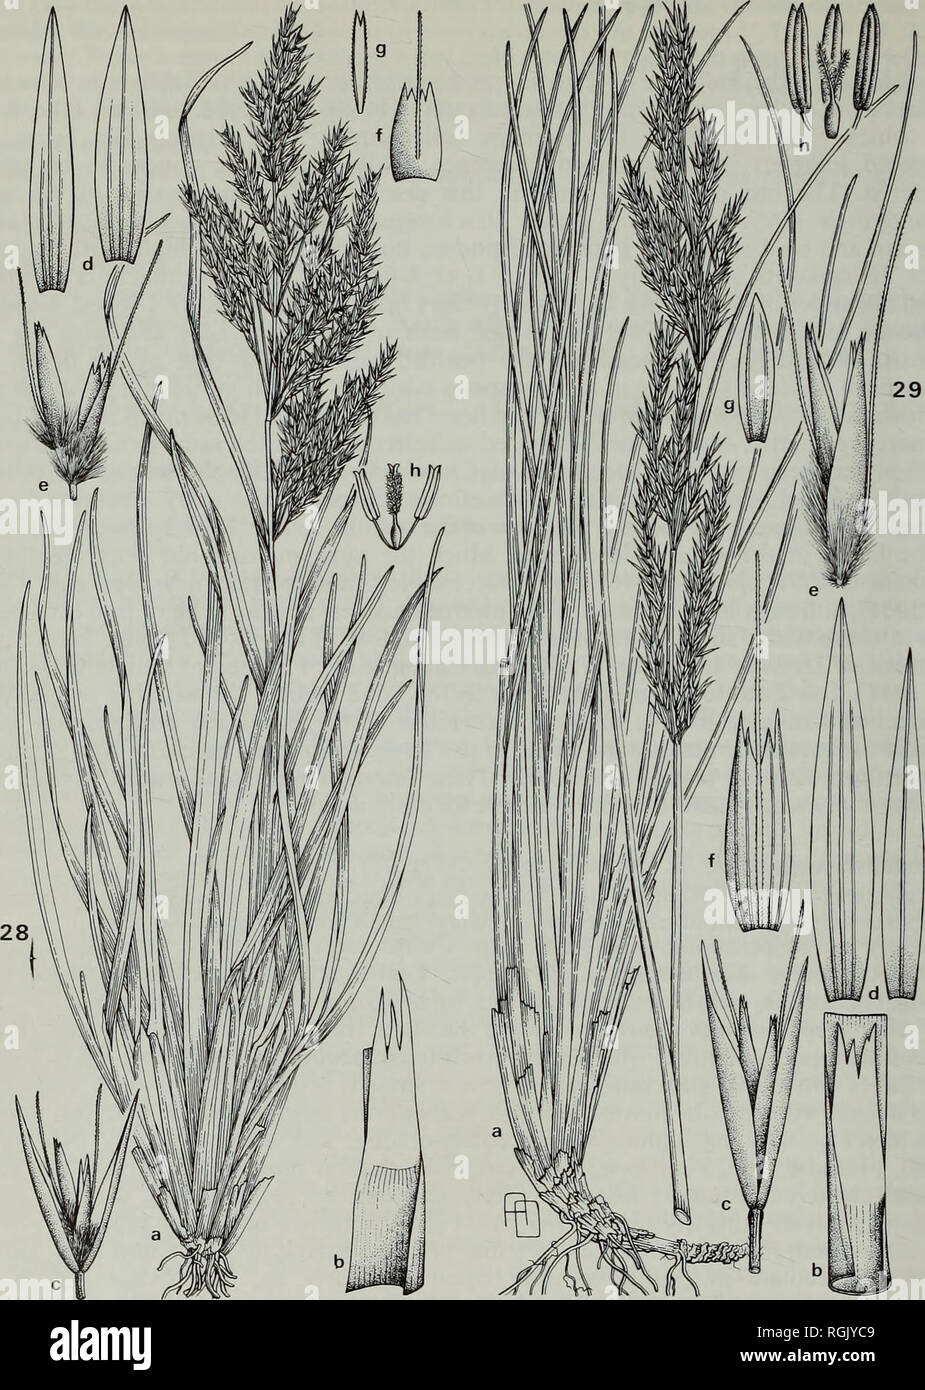 . Bulletin of the British Museum (Natural History) Botany. 390 E. W. GROVES. Fig. 28 Deschampsia mejlandii C. E. Hubbard, a. habit (x ); b. ligule (x ); c. spikelet (x 3); d. glumes (x 4); e. floret (x 4); f. lemma (x 4); g. palea (x 4); h. stamens and ovary (x 5). All drawn from Christophersen 1106. Fig. 29 Deschampsia robusta C. E. Hubbard, a. habit (x ) b. ligule (x 2); c. spikelet (x 4); d. glumes (x 5); e. floret (x 5); f. lemma (x 5); g. palea (x 5); h. stamens and ovary (x 10). The habit is a composite drawing based on Wace G. 245 and Wace G. 217; the ligule is drawn from Wace G. 2 Stock Photo